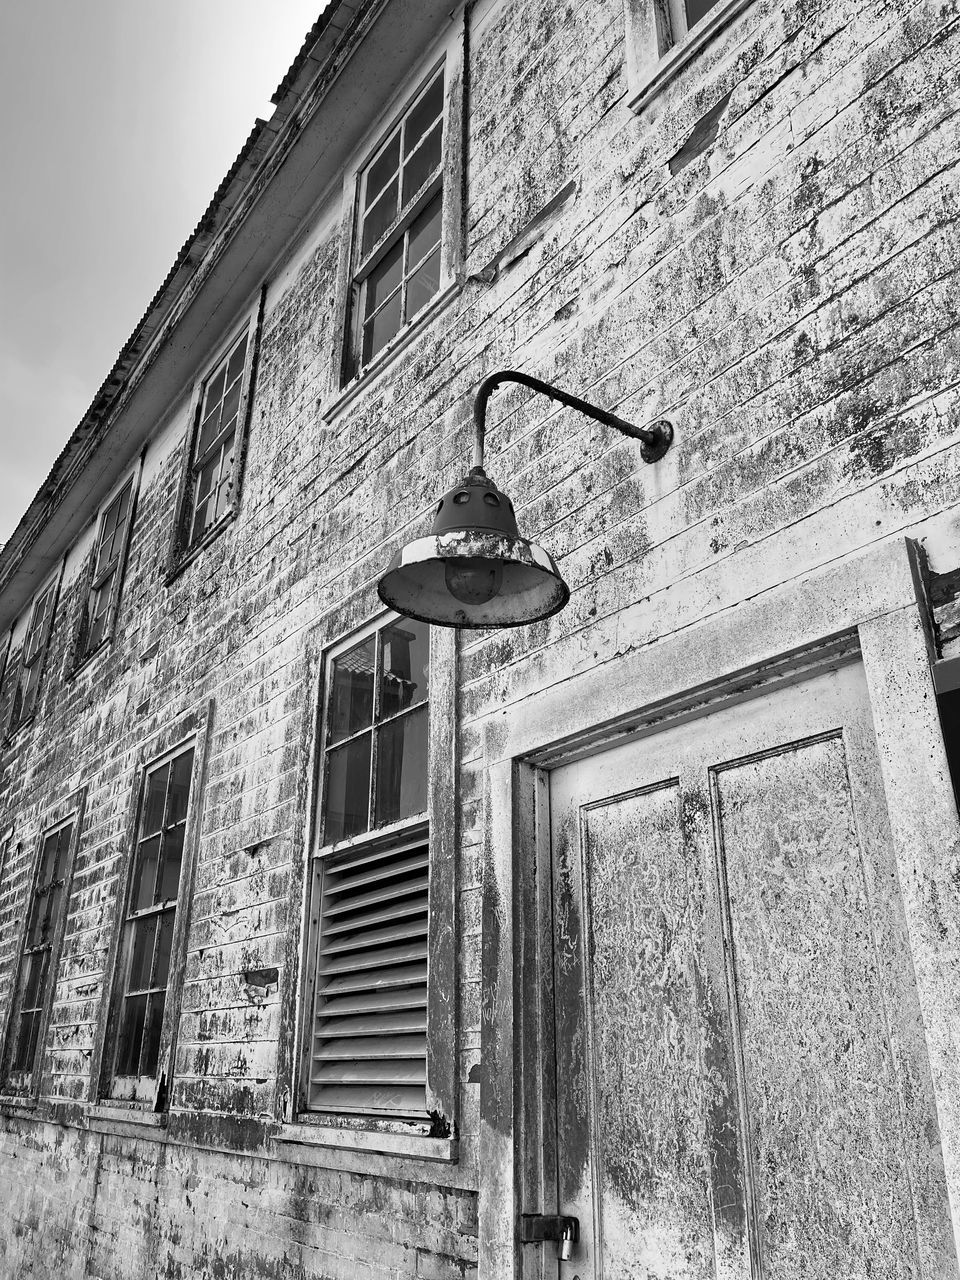 architecture, built structure, building exterior, white, window, house, black and white, monochrome, building, history, urban area, monochrome photography, low angle view, no people, street, wall, old, black, day, road, residential district, wall - building feature, abandoned, outdoors, sky, facade, nature, door, entrance, city, alley, rundown, the past